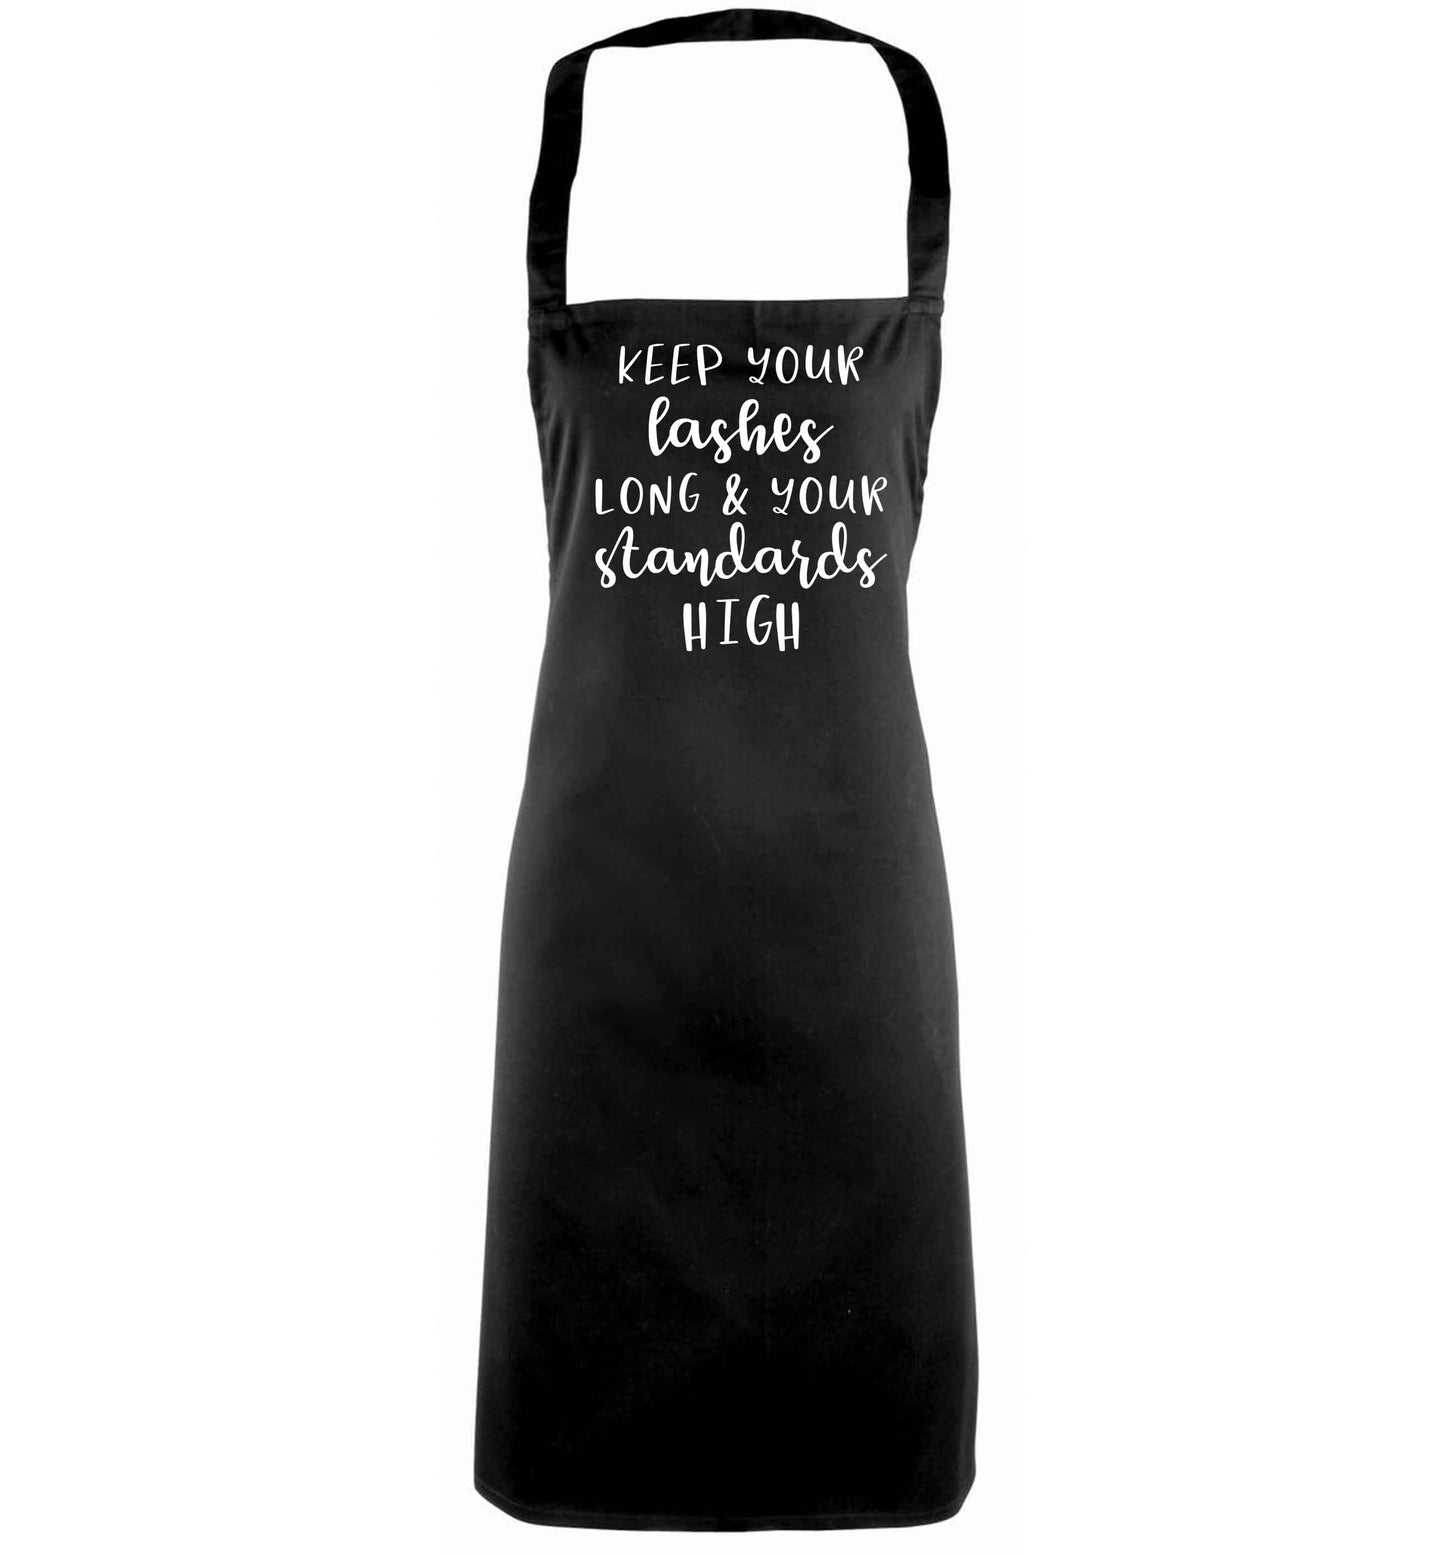 Keep your lashes long and your standards high black apron